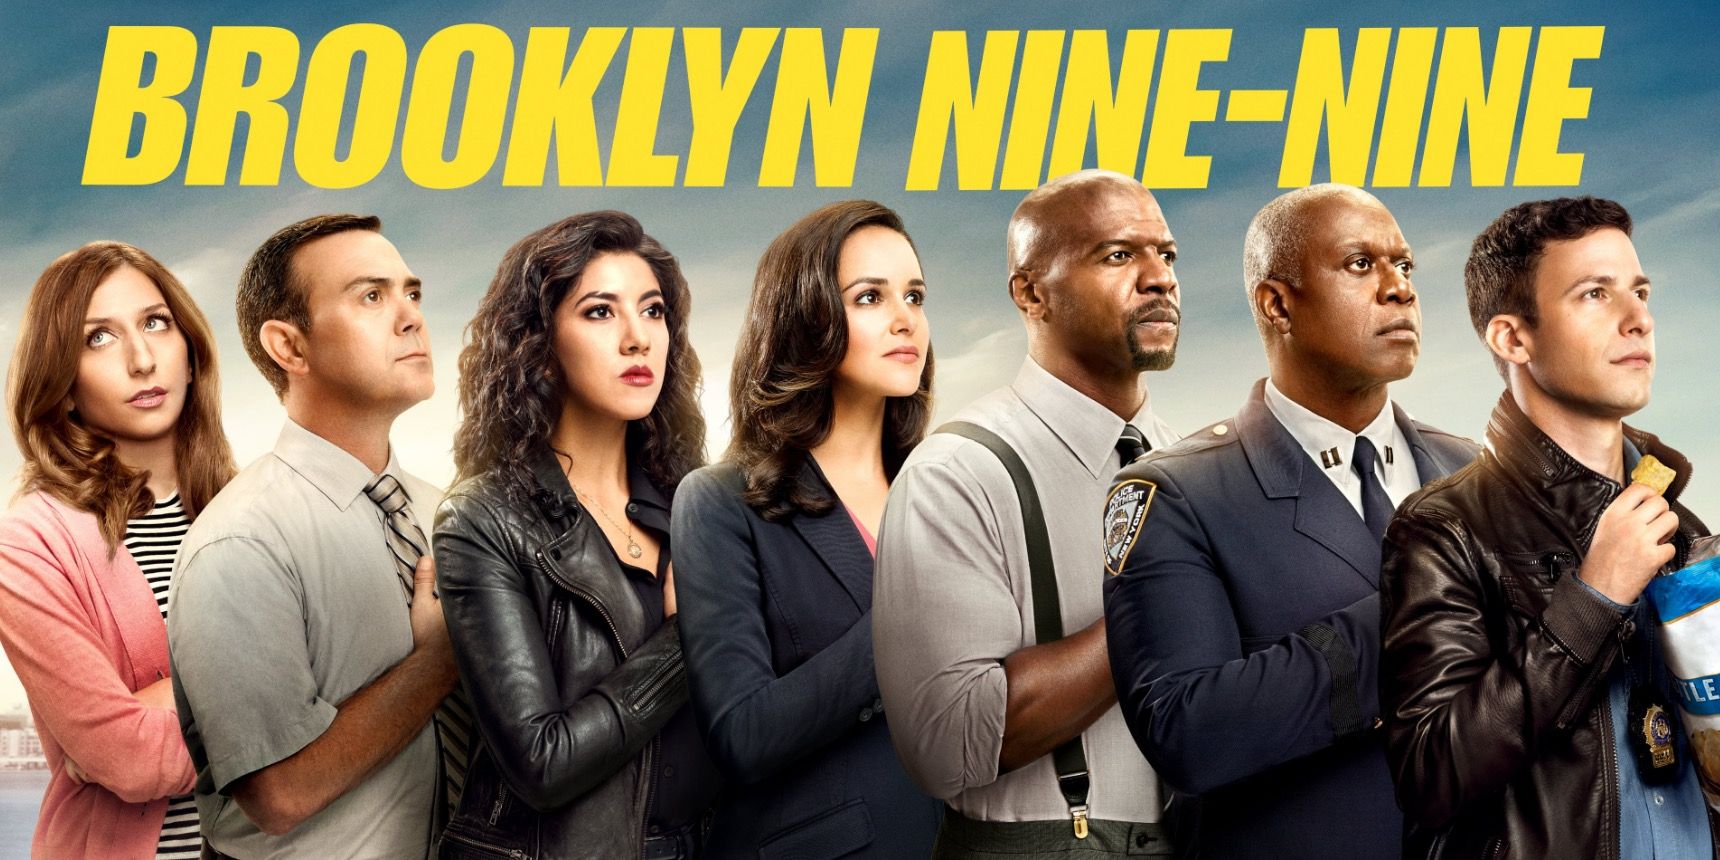 Brooklyn Nine Nine characters in a poster lined up and facing the same direction